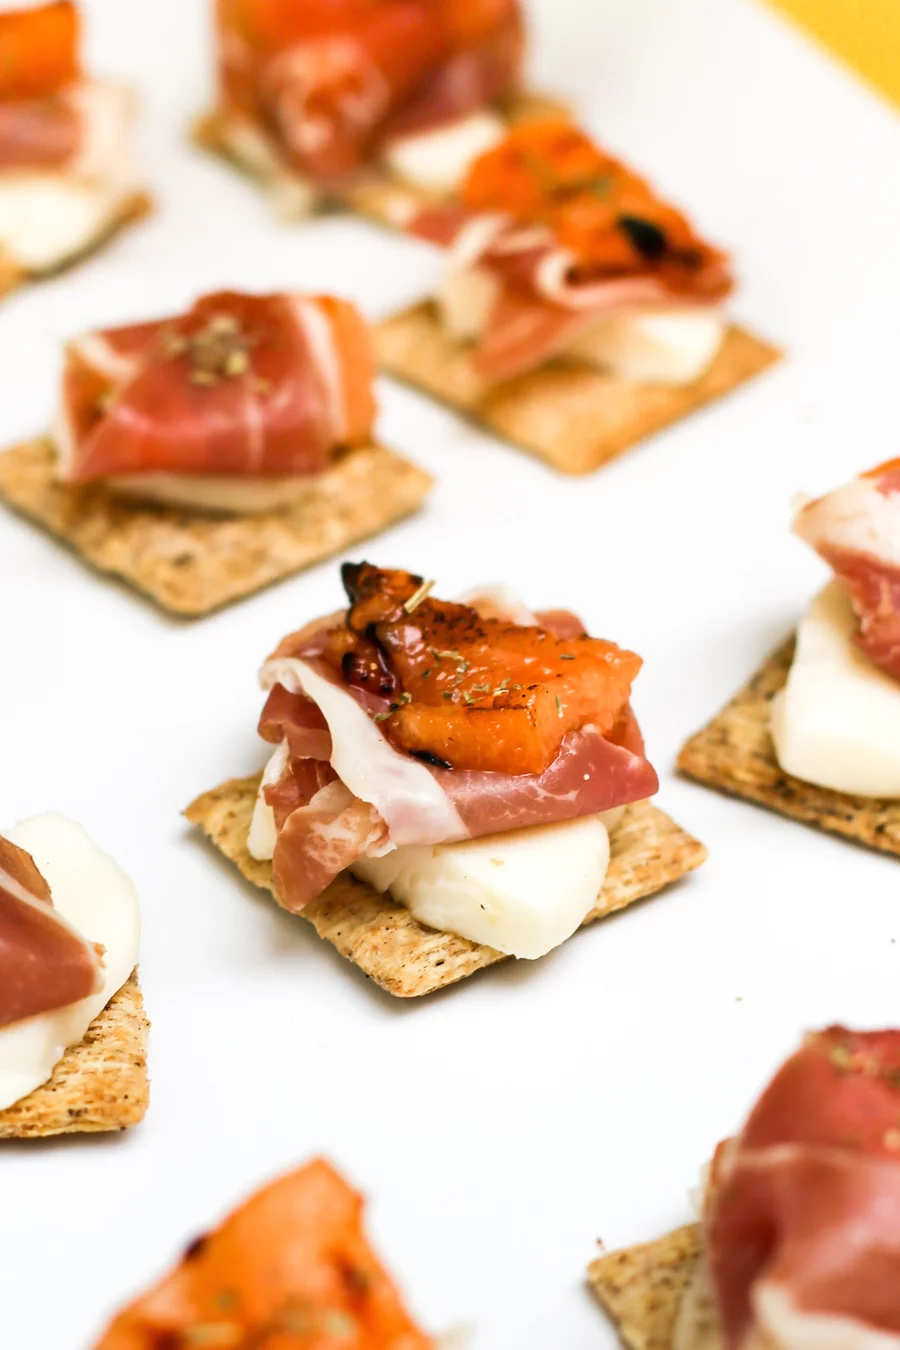 Cantaproscimozzcuits. That's grilled cantaloupe with prosciutto and mozzarella cheese on a TRISCUIT.